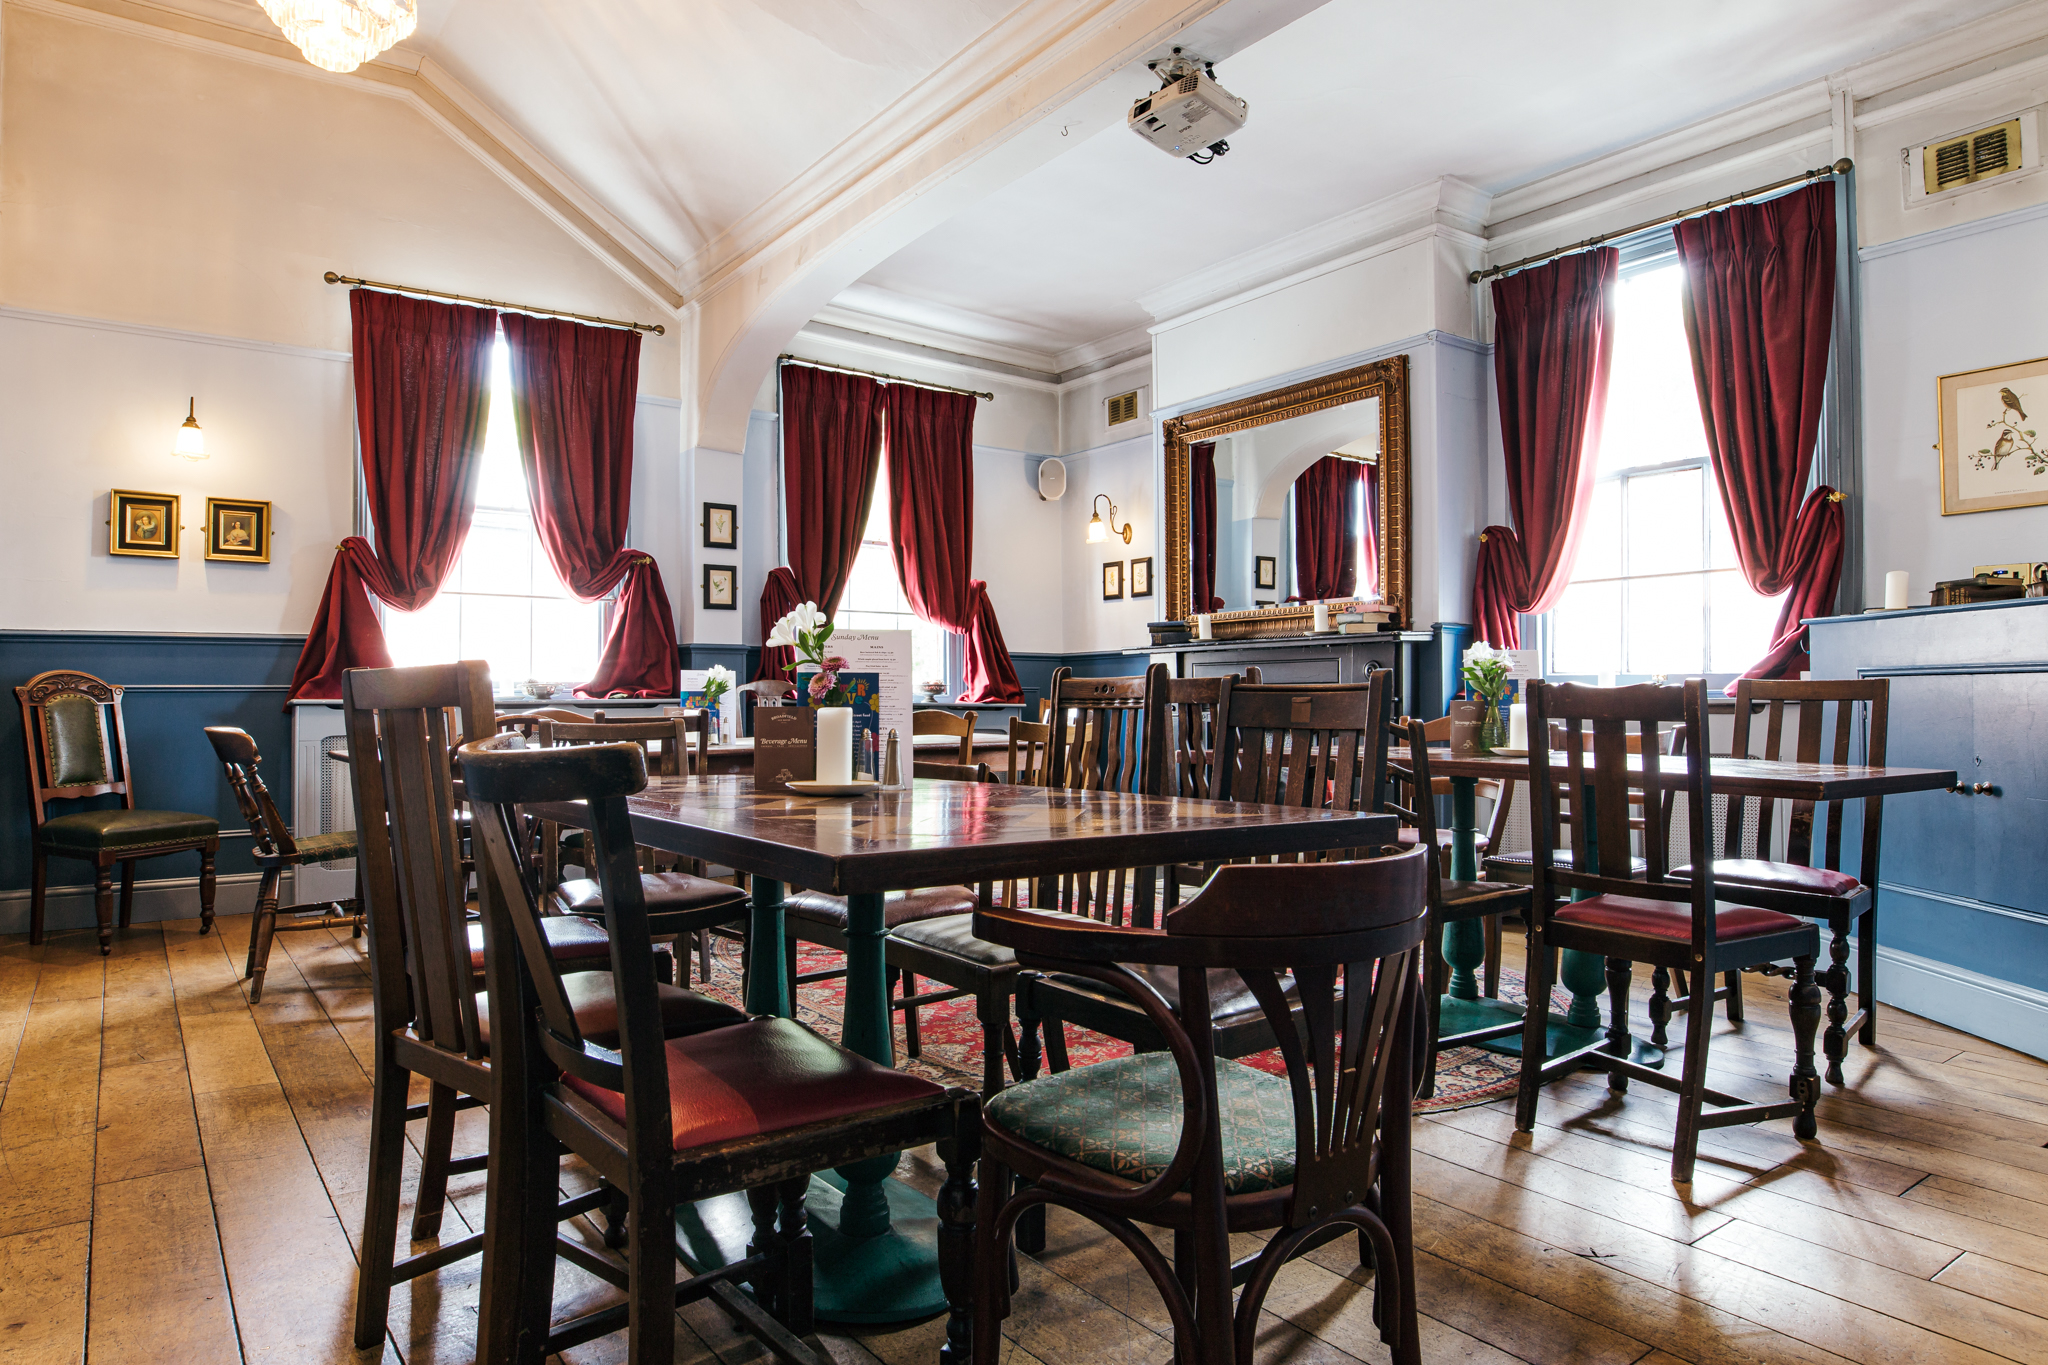 The Broadfield Ale House Beautiful Function Room